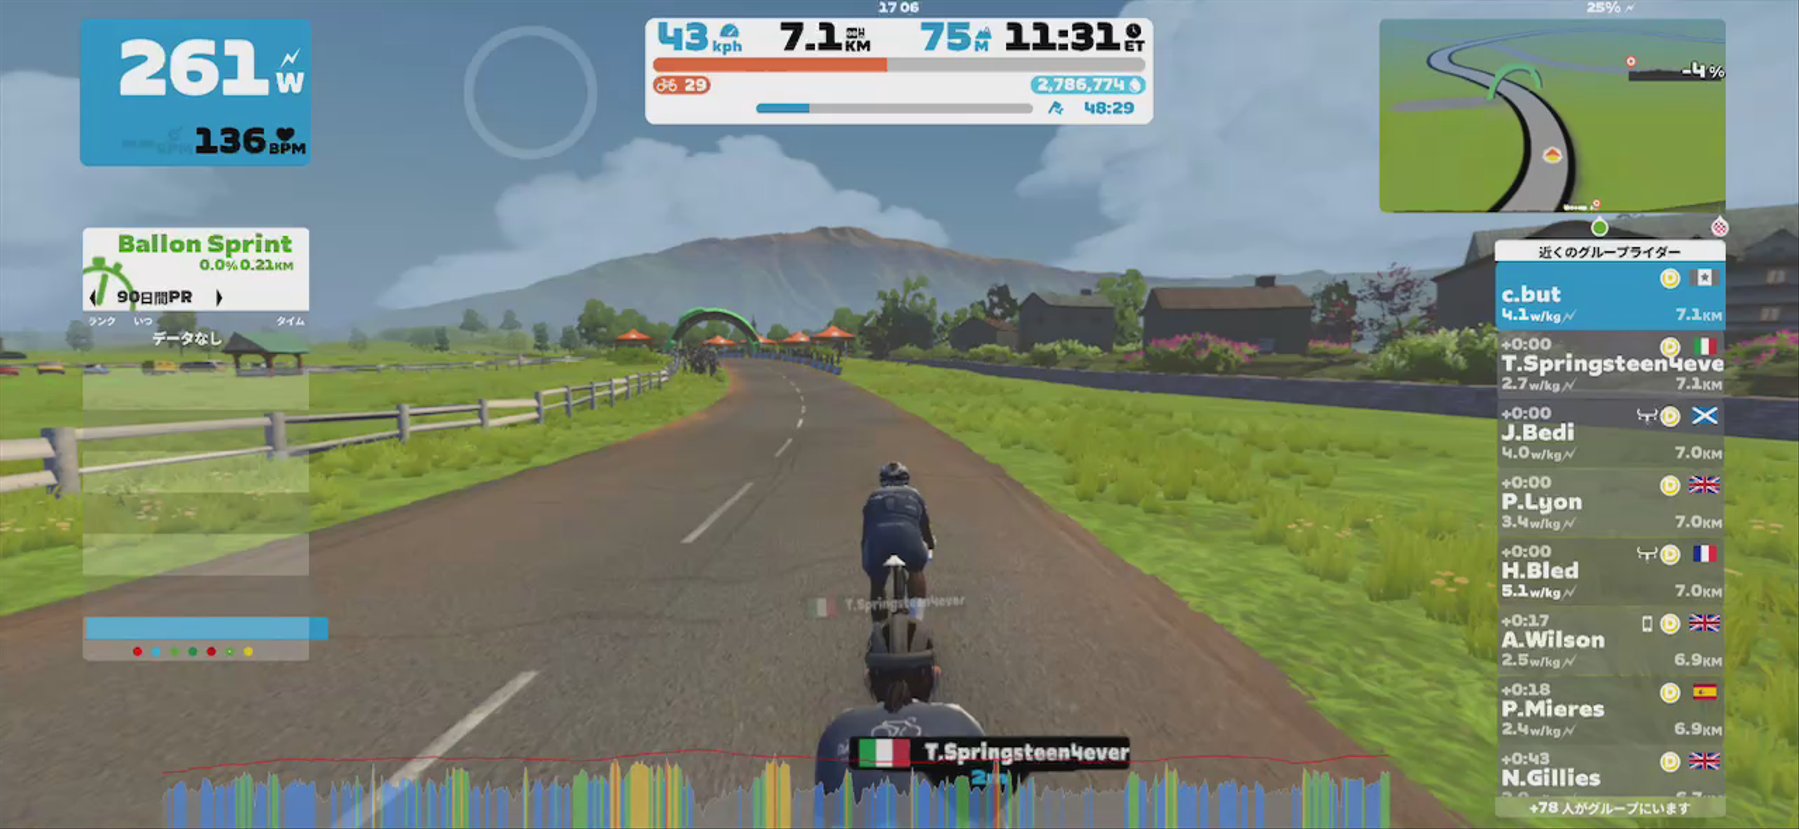 Zwift - Group Ride: DBR Social Ride  (D) on Douce France in France